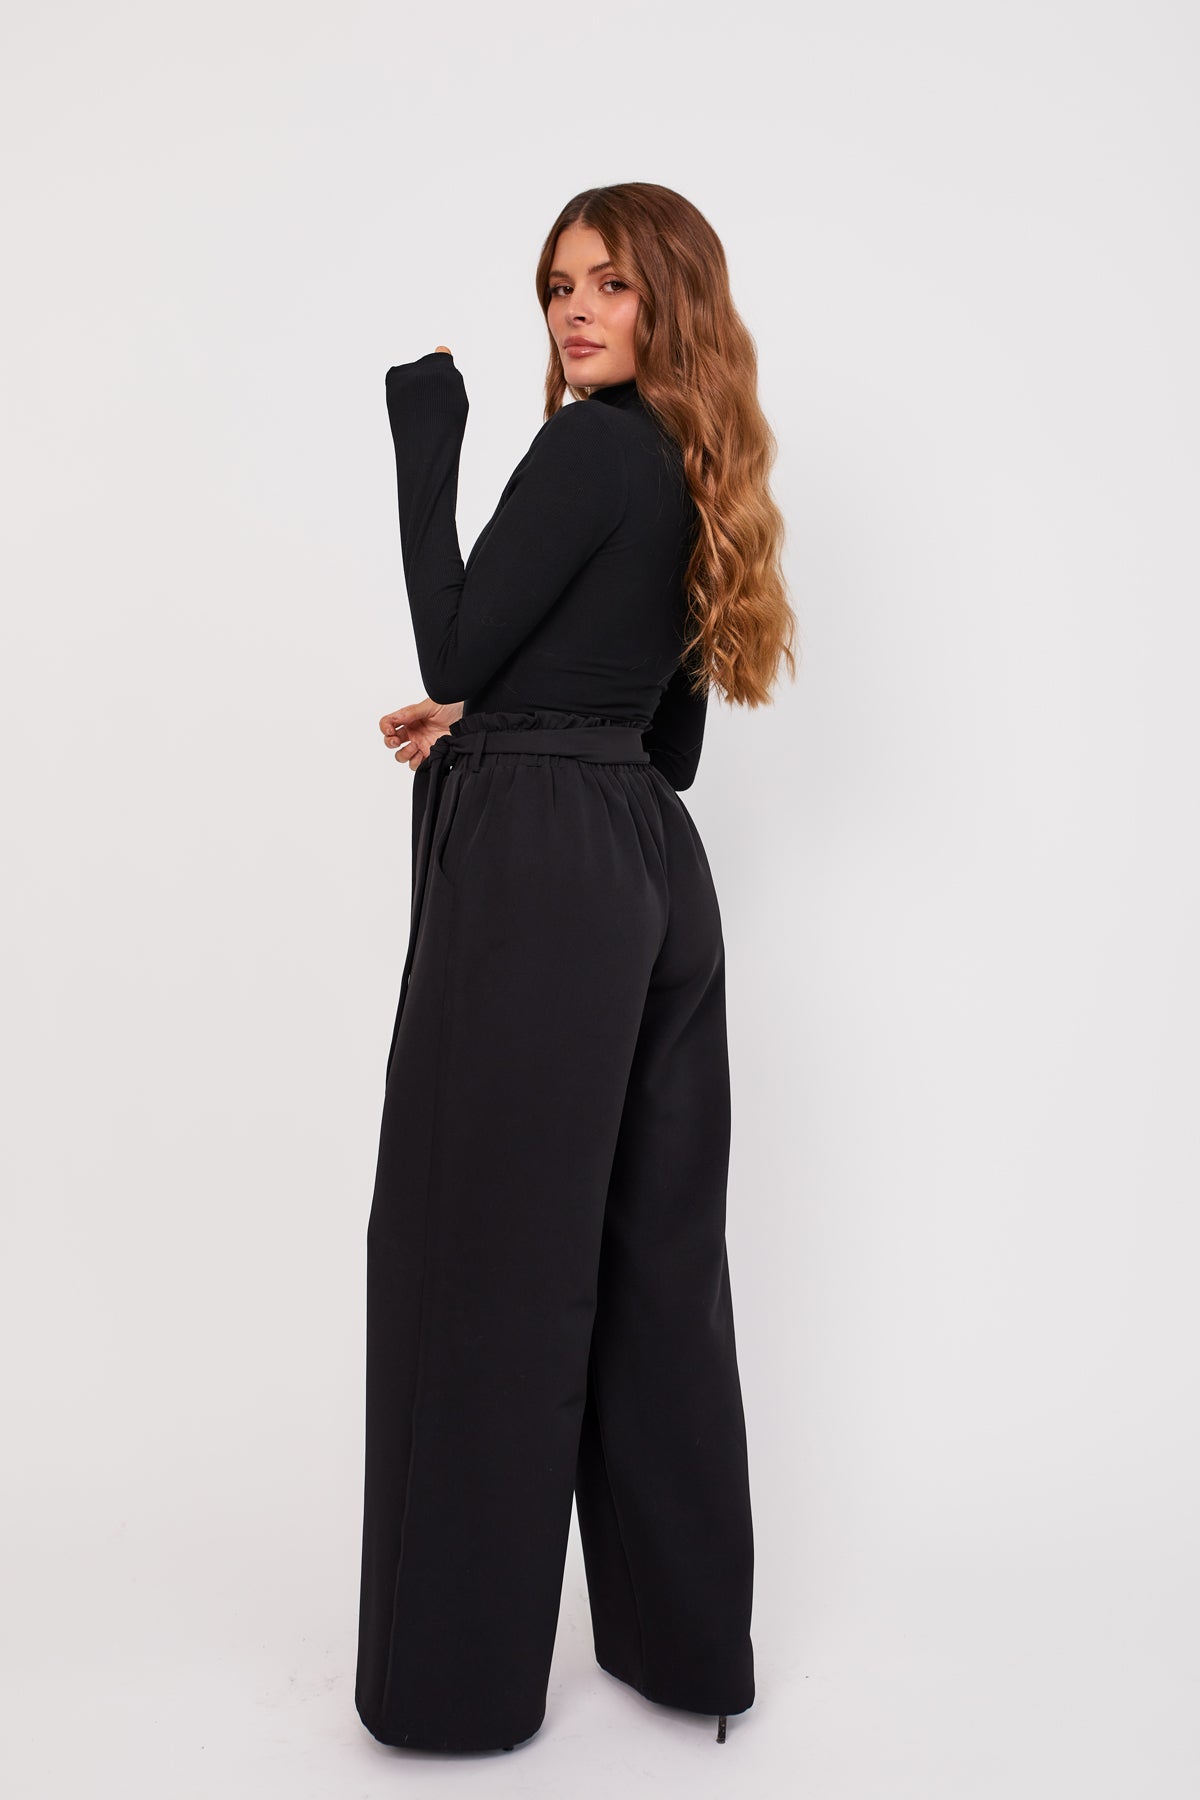 KEEP IT CLASSY BLACK BELTED TROUSER